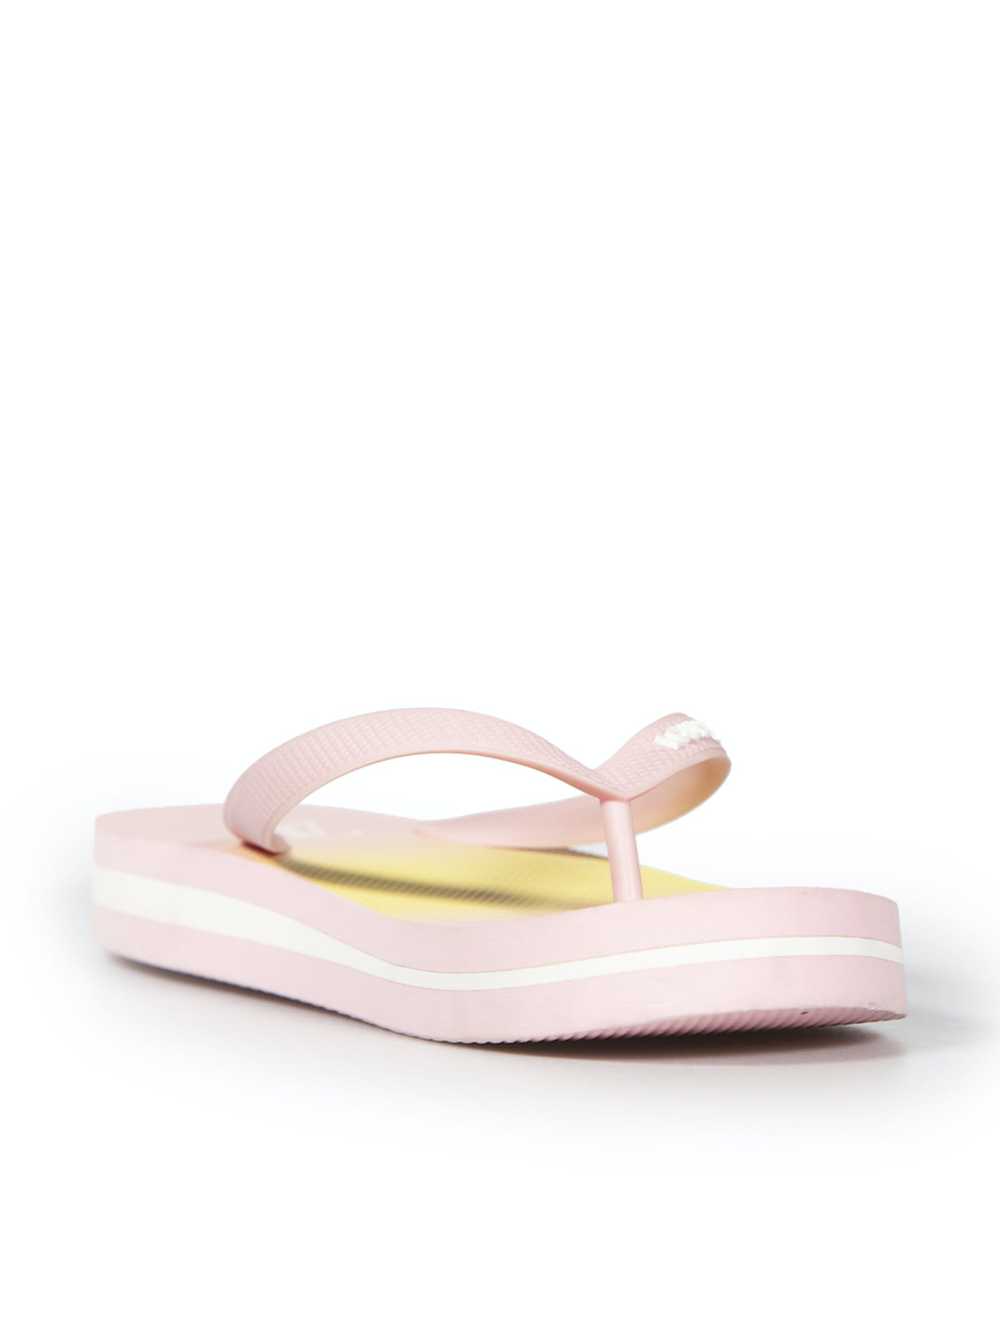 Louis Vuitton Pink “By The Pool” Logo Slippers - image 2